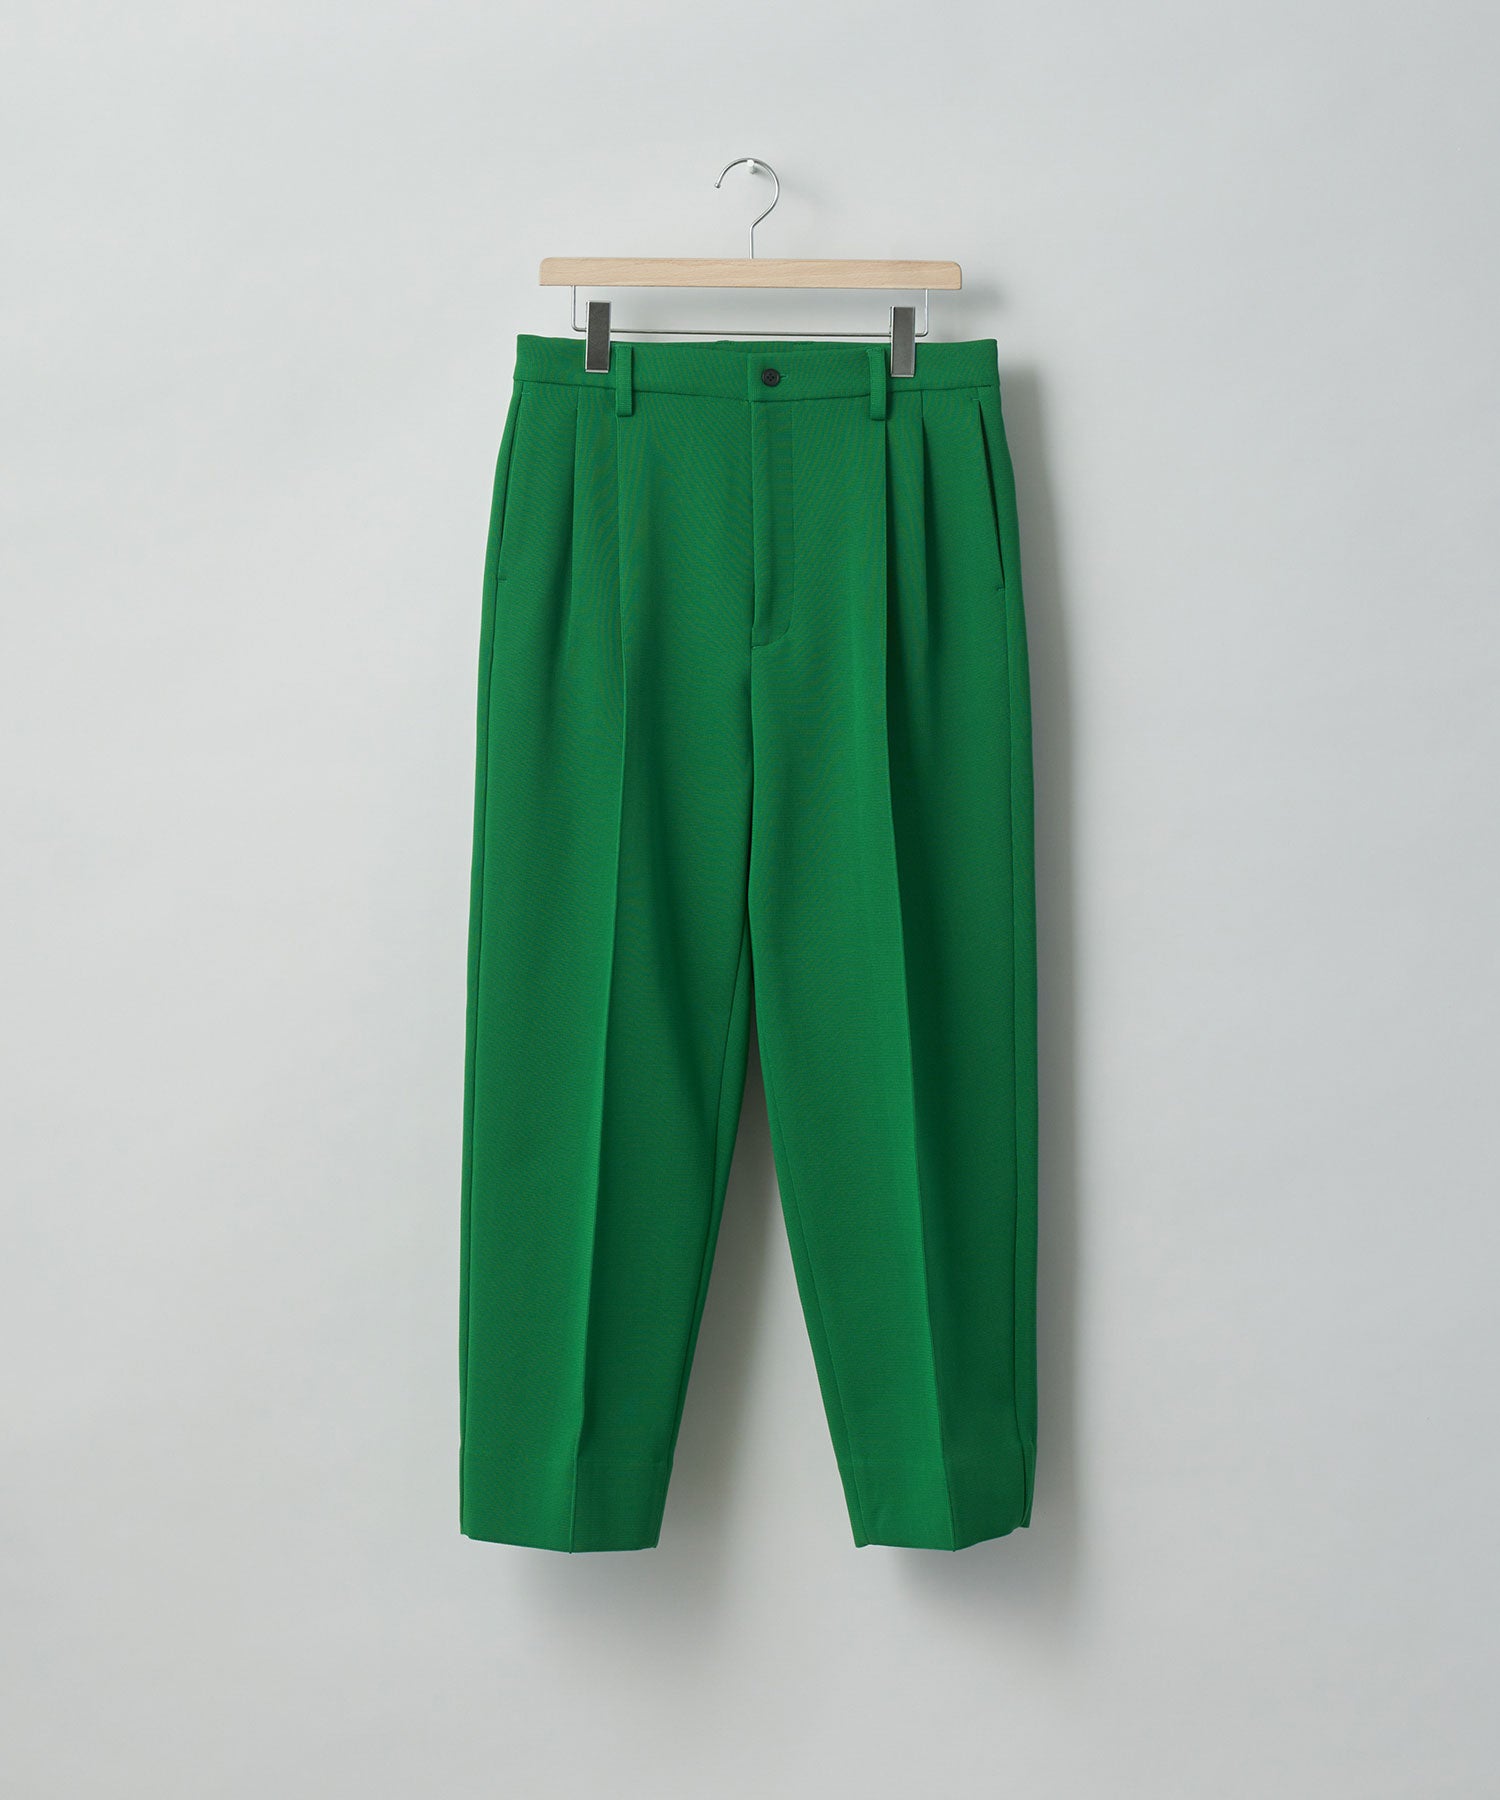 stein(シュタイン)の23SSコレクションのHIGH COUNT KNIT PIN TUCK WIDE TROUSERSのGREEN